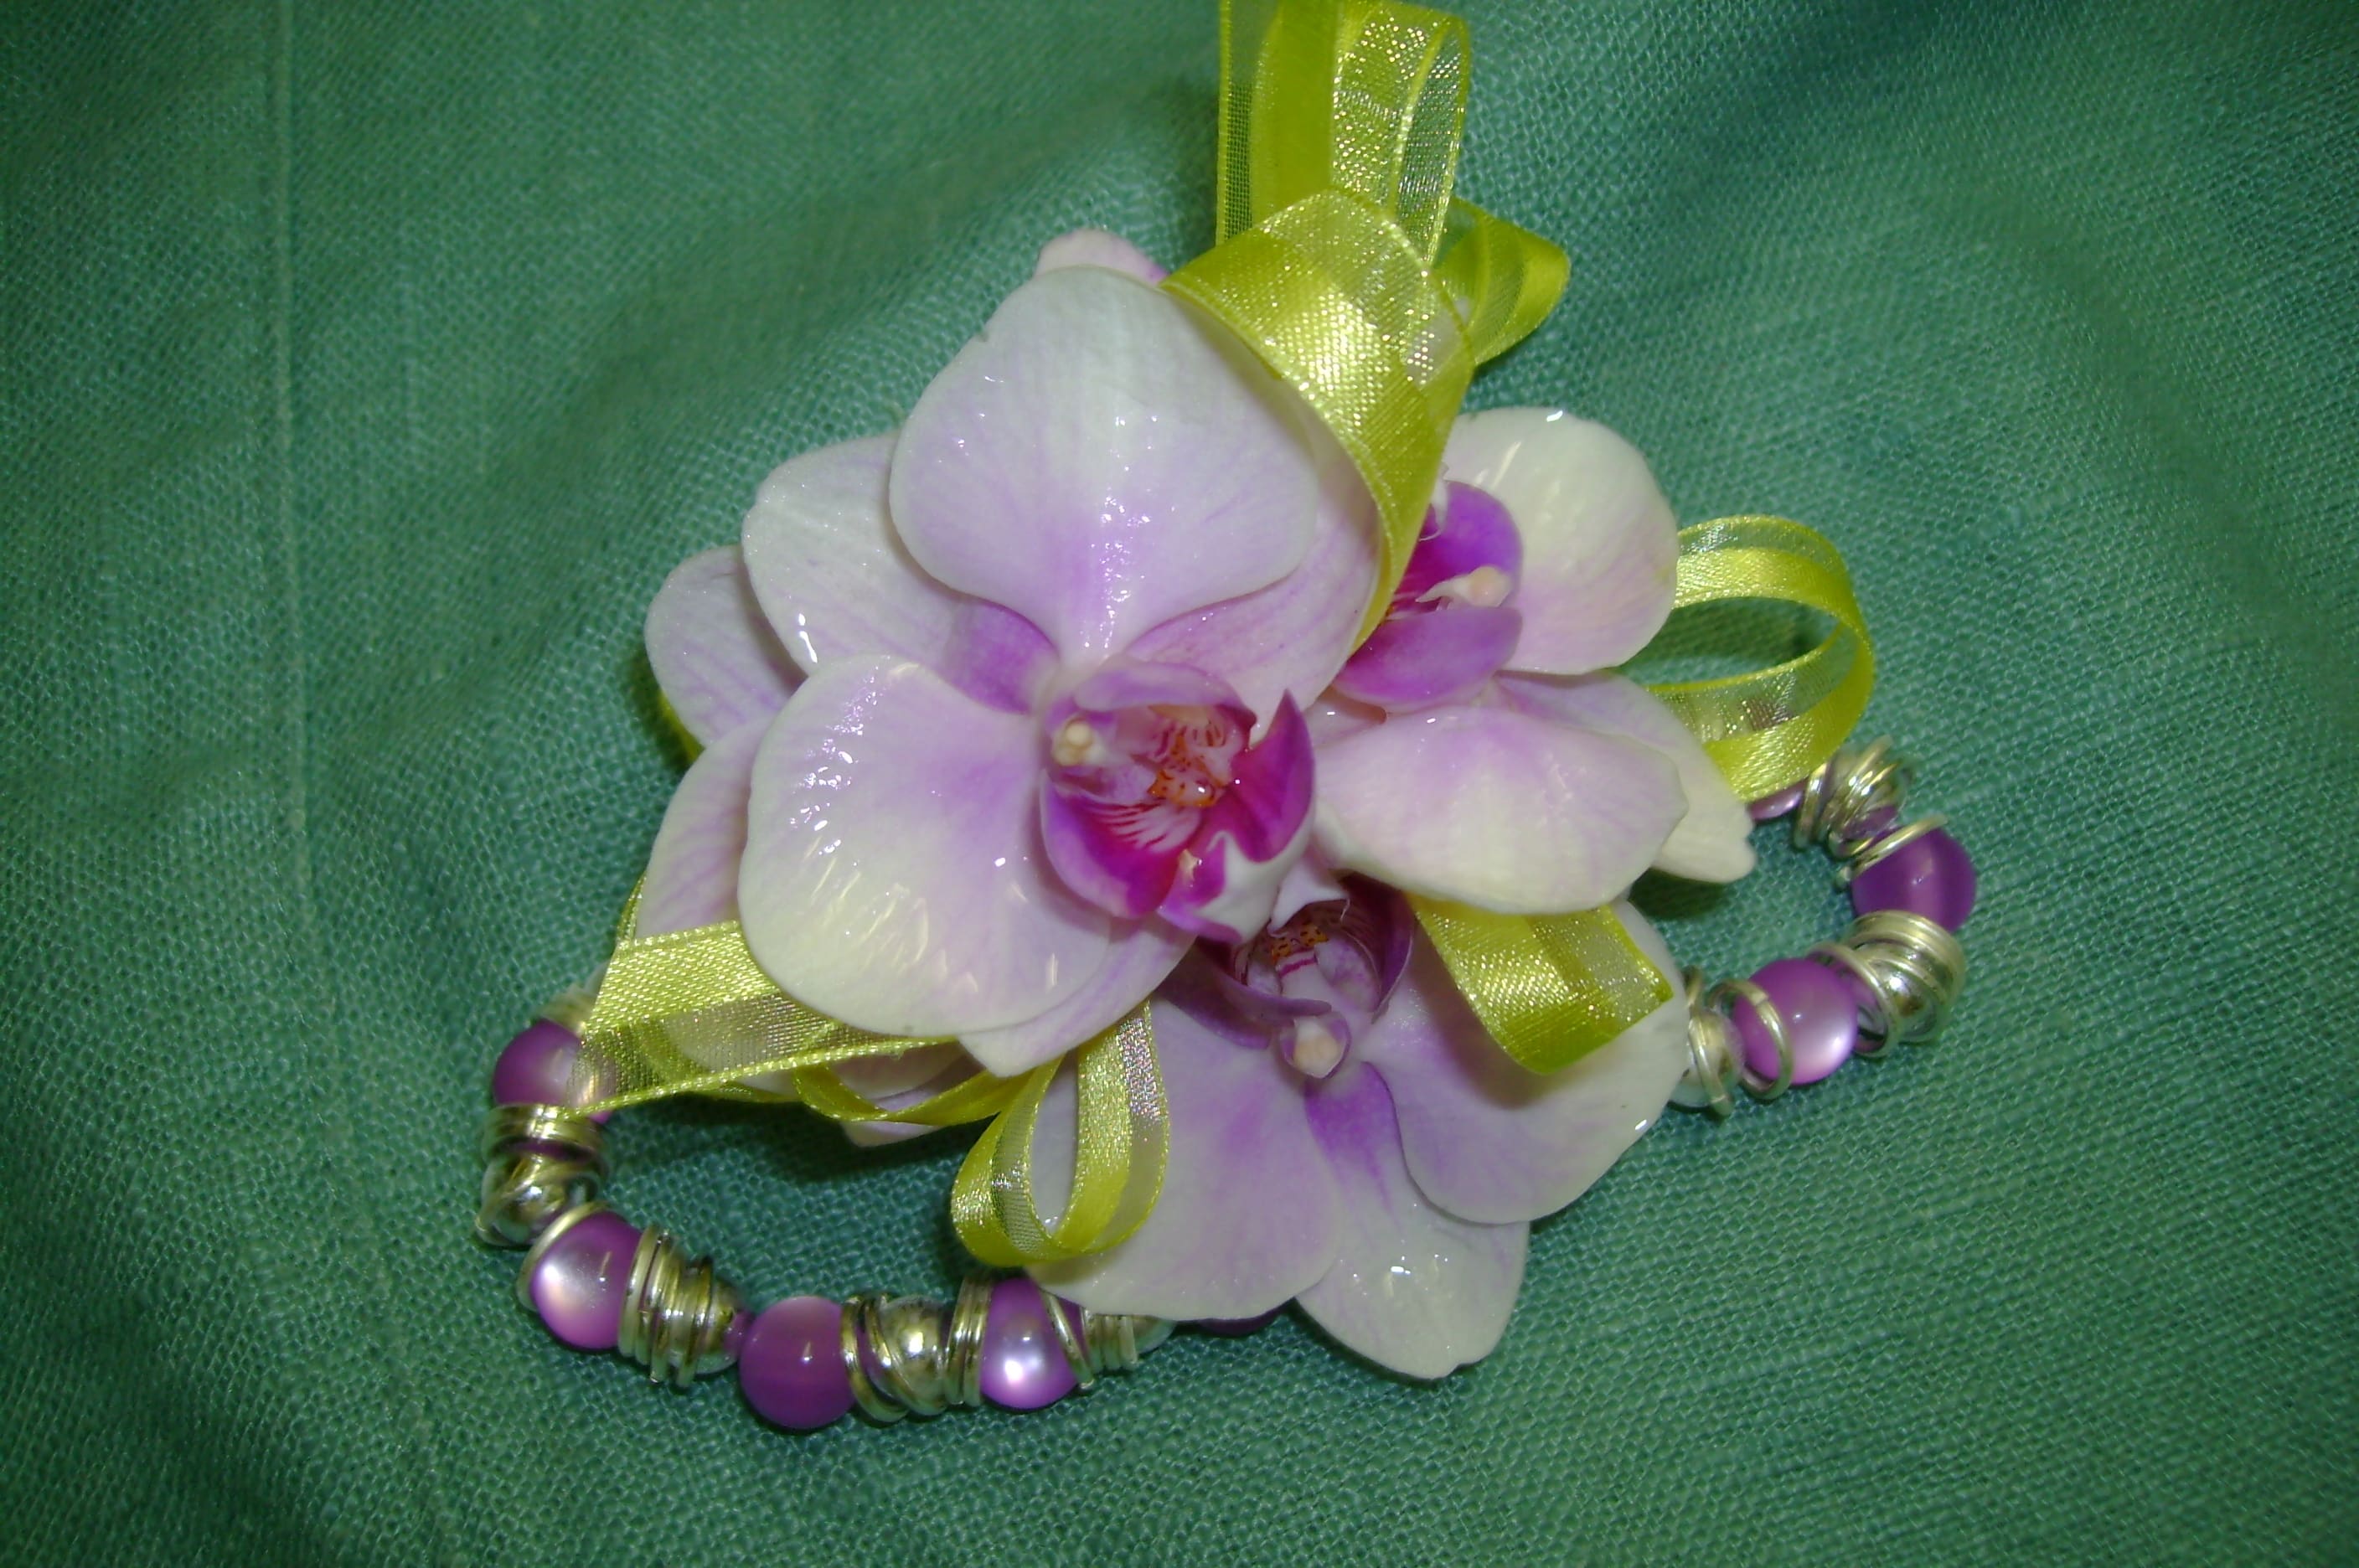 TWO-TONED GREEN 4" ARTIFICIAL PHALAENOPSIS ORCHID WRIST CORSAGE